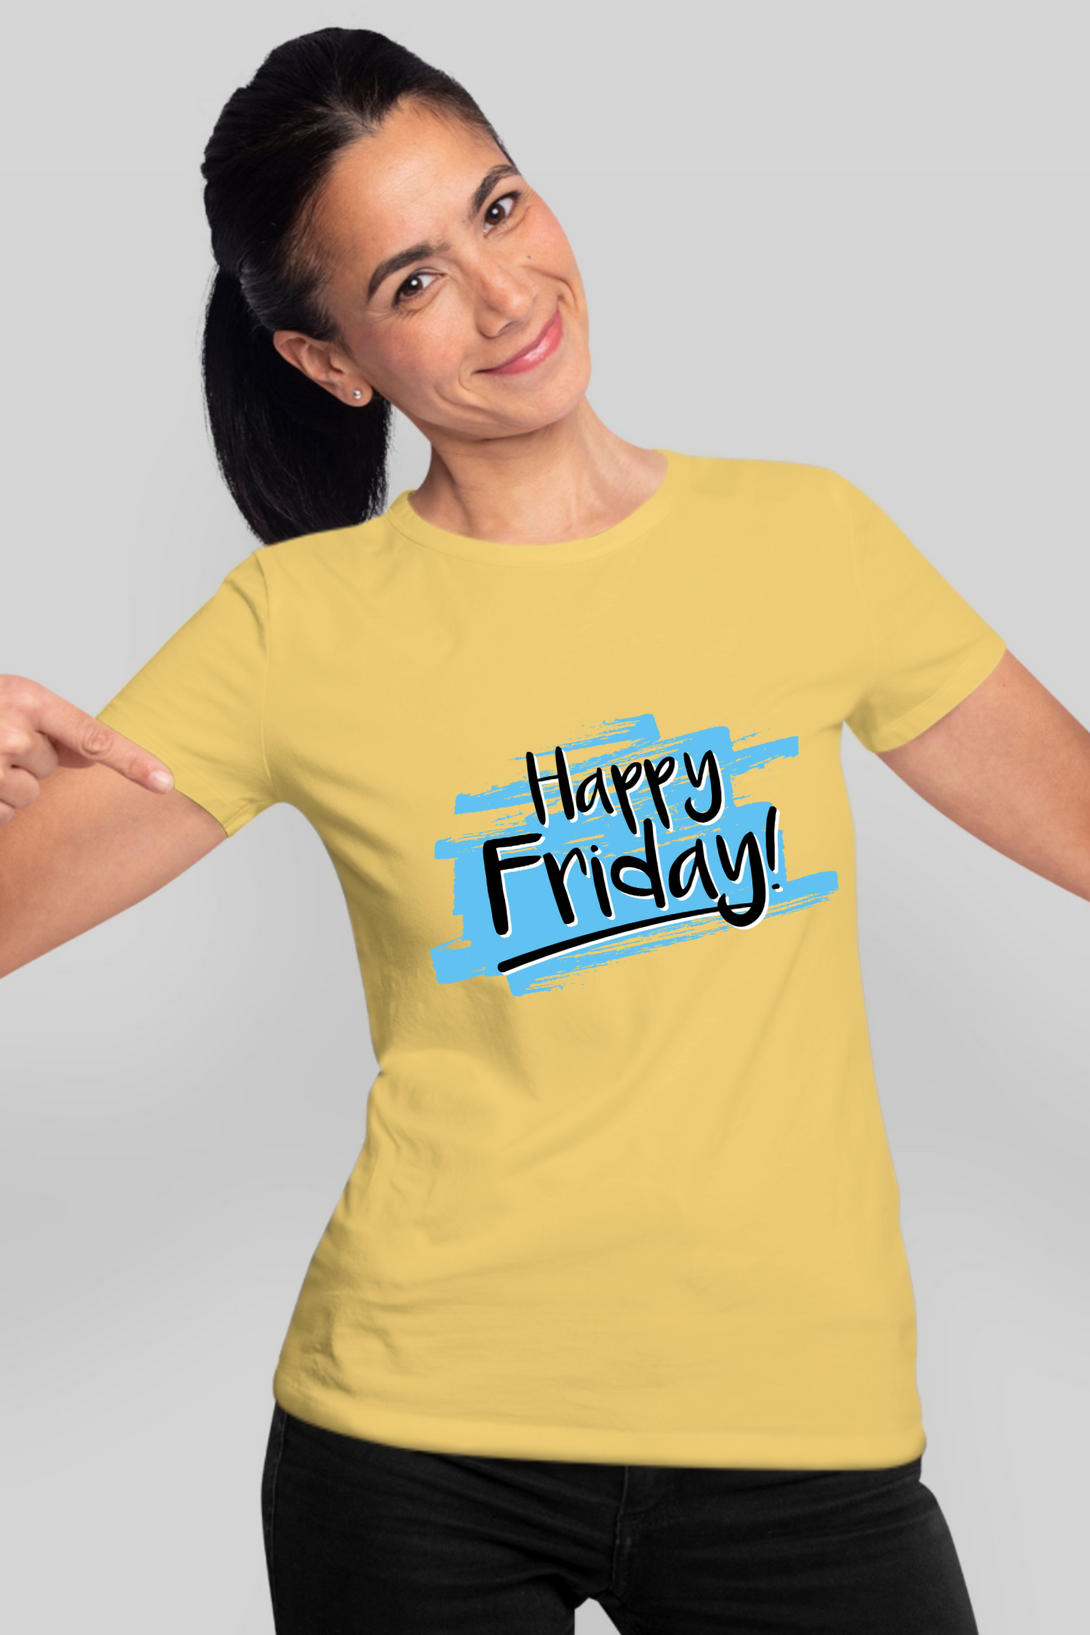 Happy Friday Printed T-Shirt For Women - WowWaves - 9